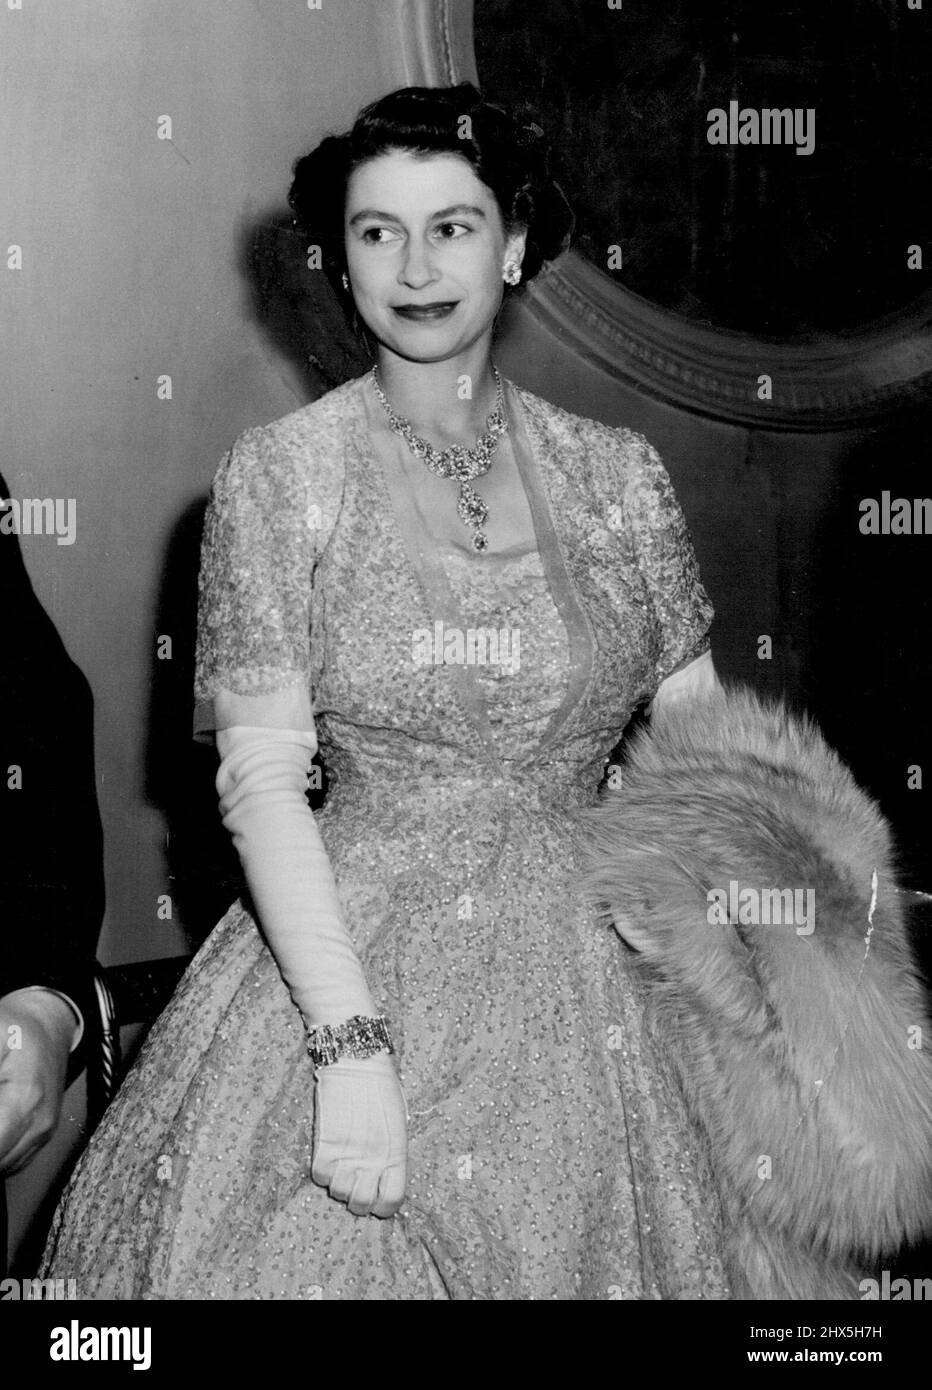 Princess At The Ballet. Princess Elizabeth, in a striking crinoline gown, pictured when with the Queen, she attended a gala performance of Frederick Ashton's new ballet 'Tiresias' at the Royal Opera House, Covent Garden. The performance was held in aid of the Sadler's Wells Ballet Benevolent Fund. July 9, 1951. Stock Photo